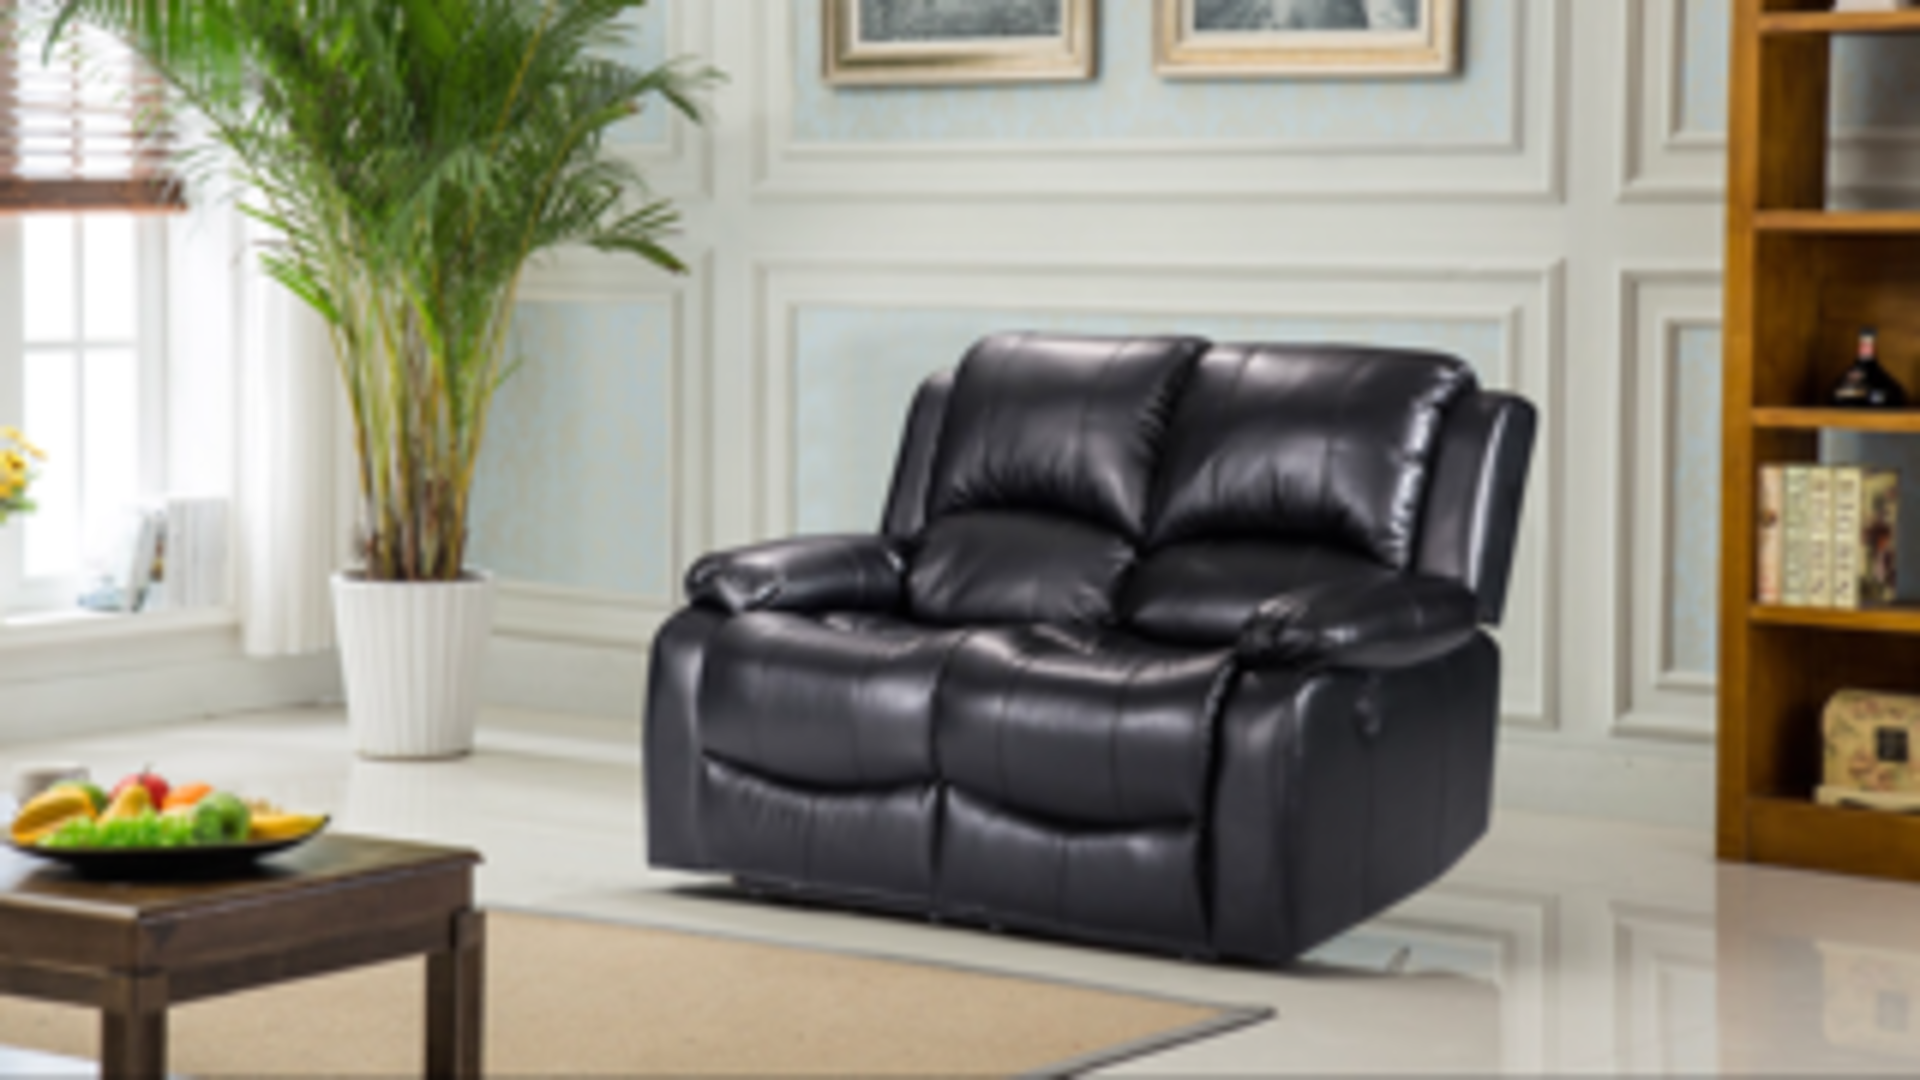 Brand new boxed Vancouver 3 seater plus 2 seater black leather reclining sofas - Bild 2 aus 3